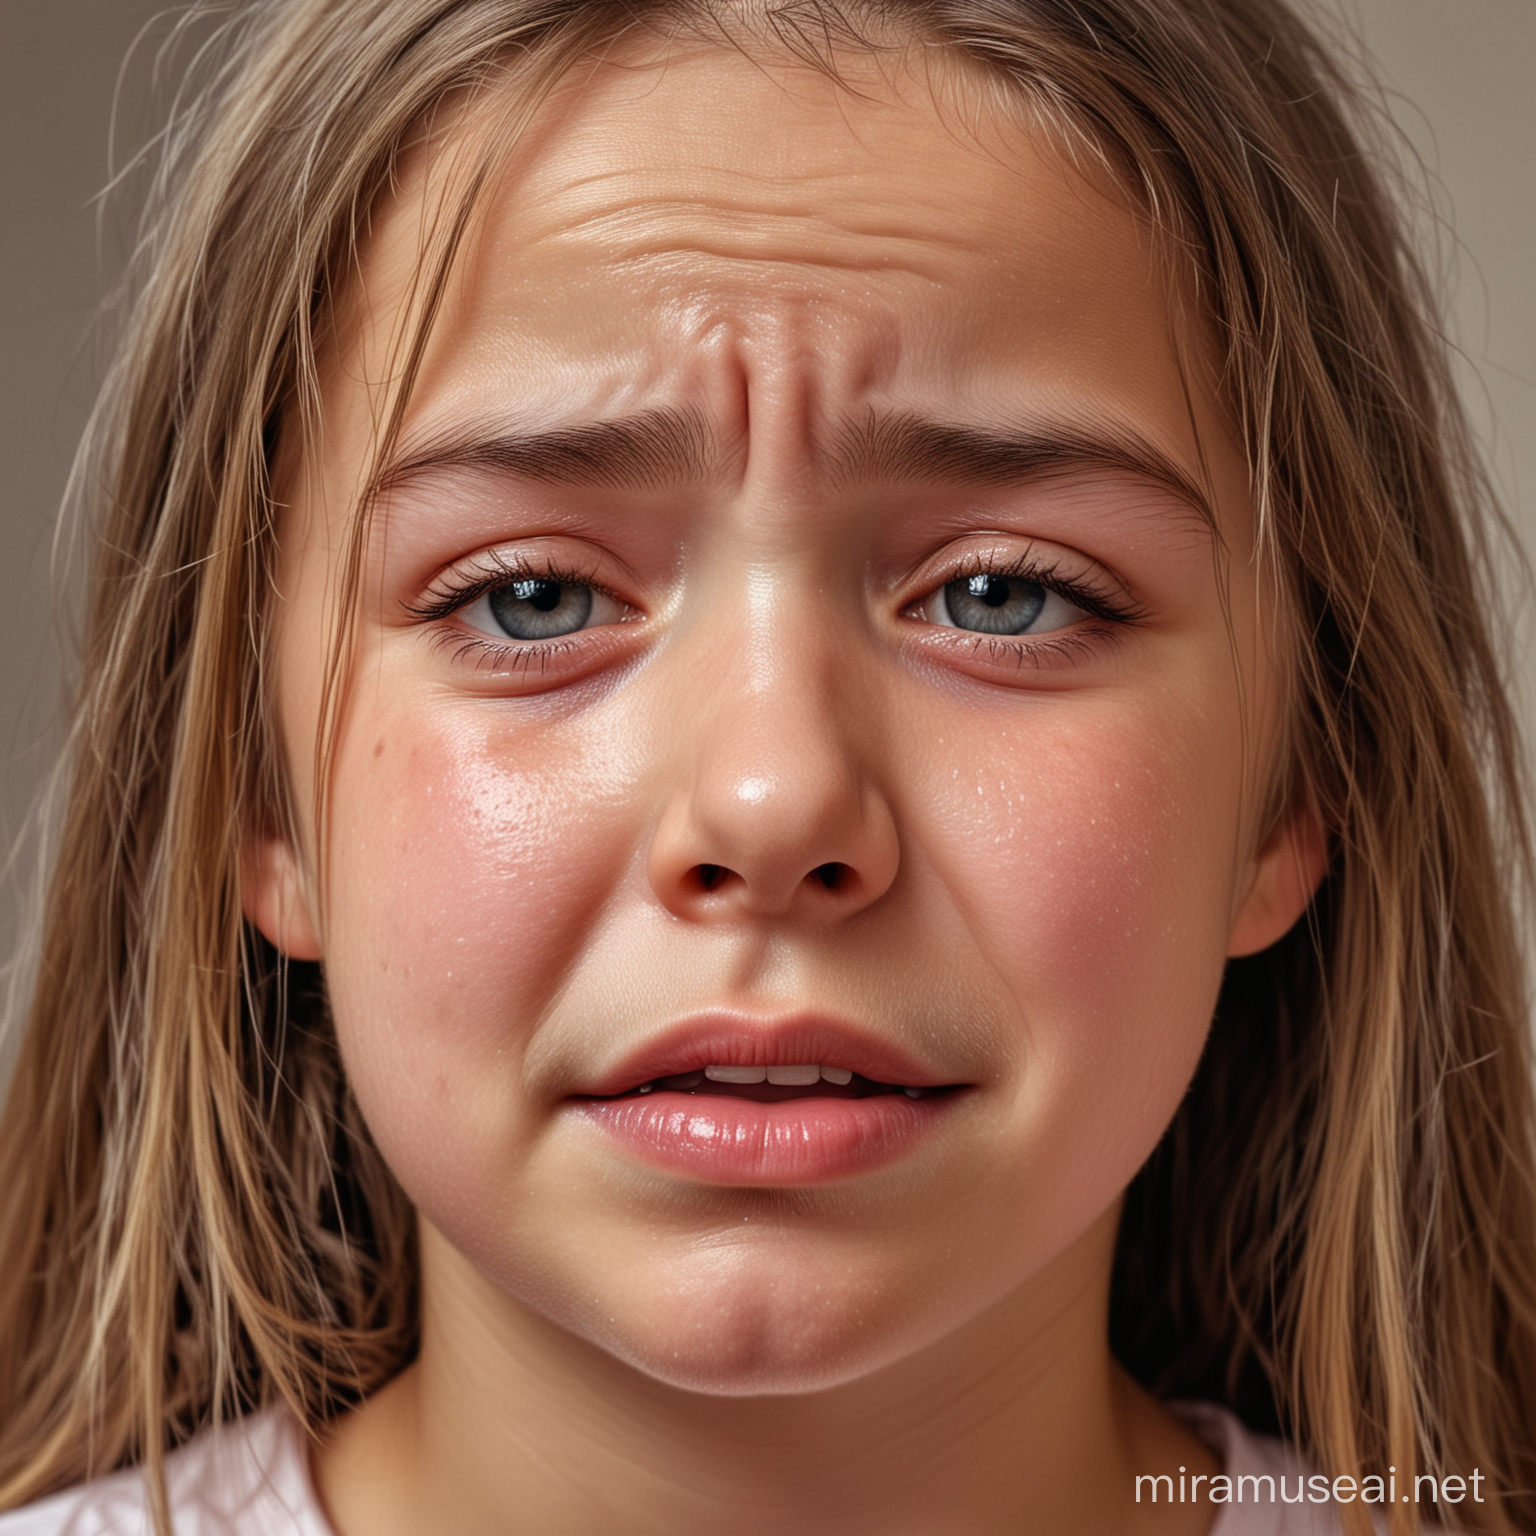 Upset 9YearOld Girl Portrait Tears and Emotion